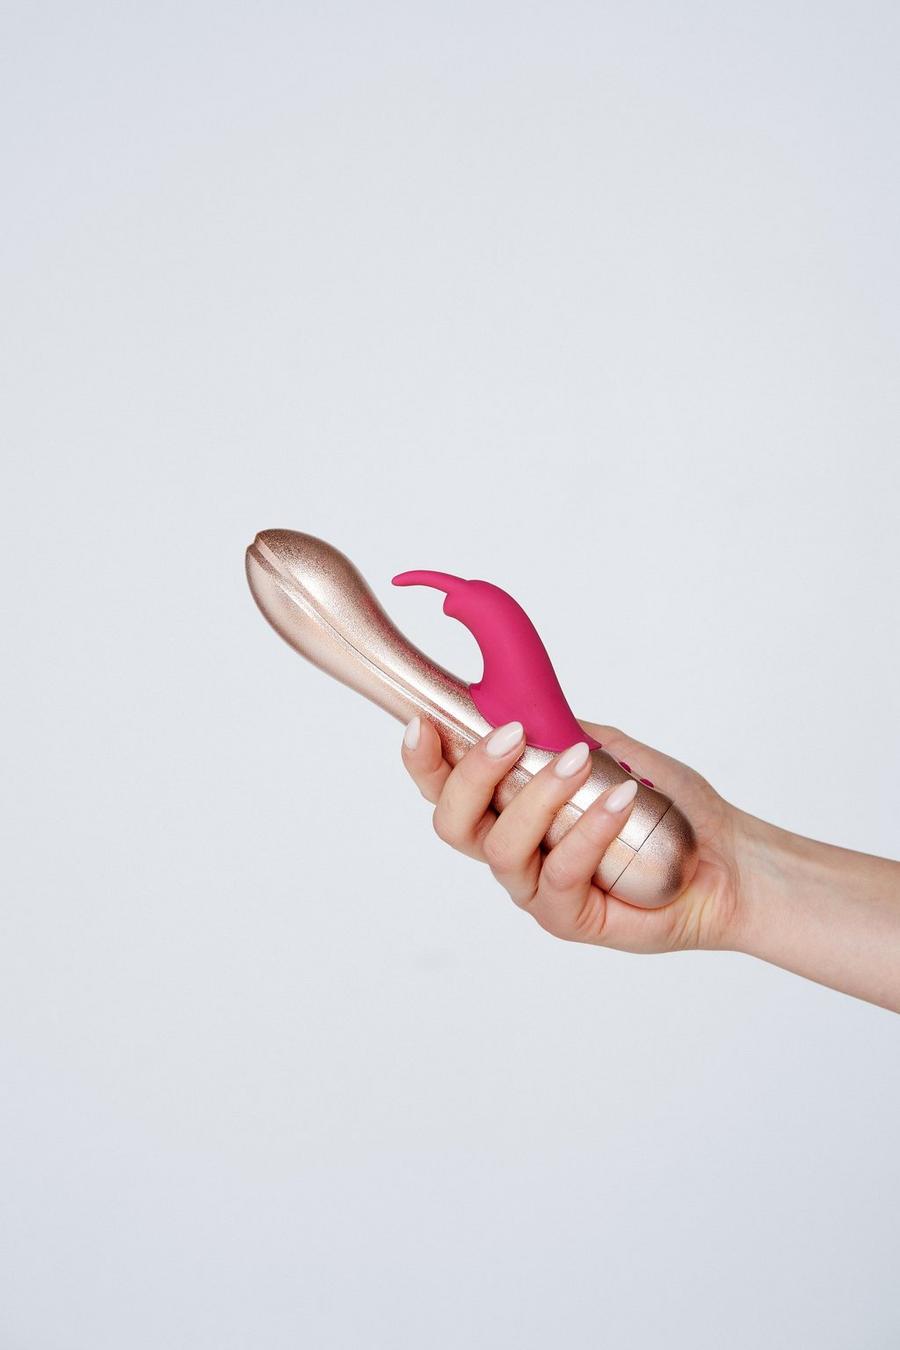 Honey Shaft and Clitoral Vibrator Sex Toy